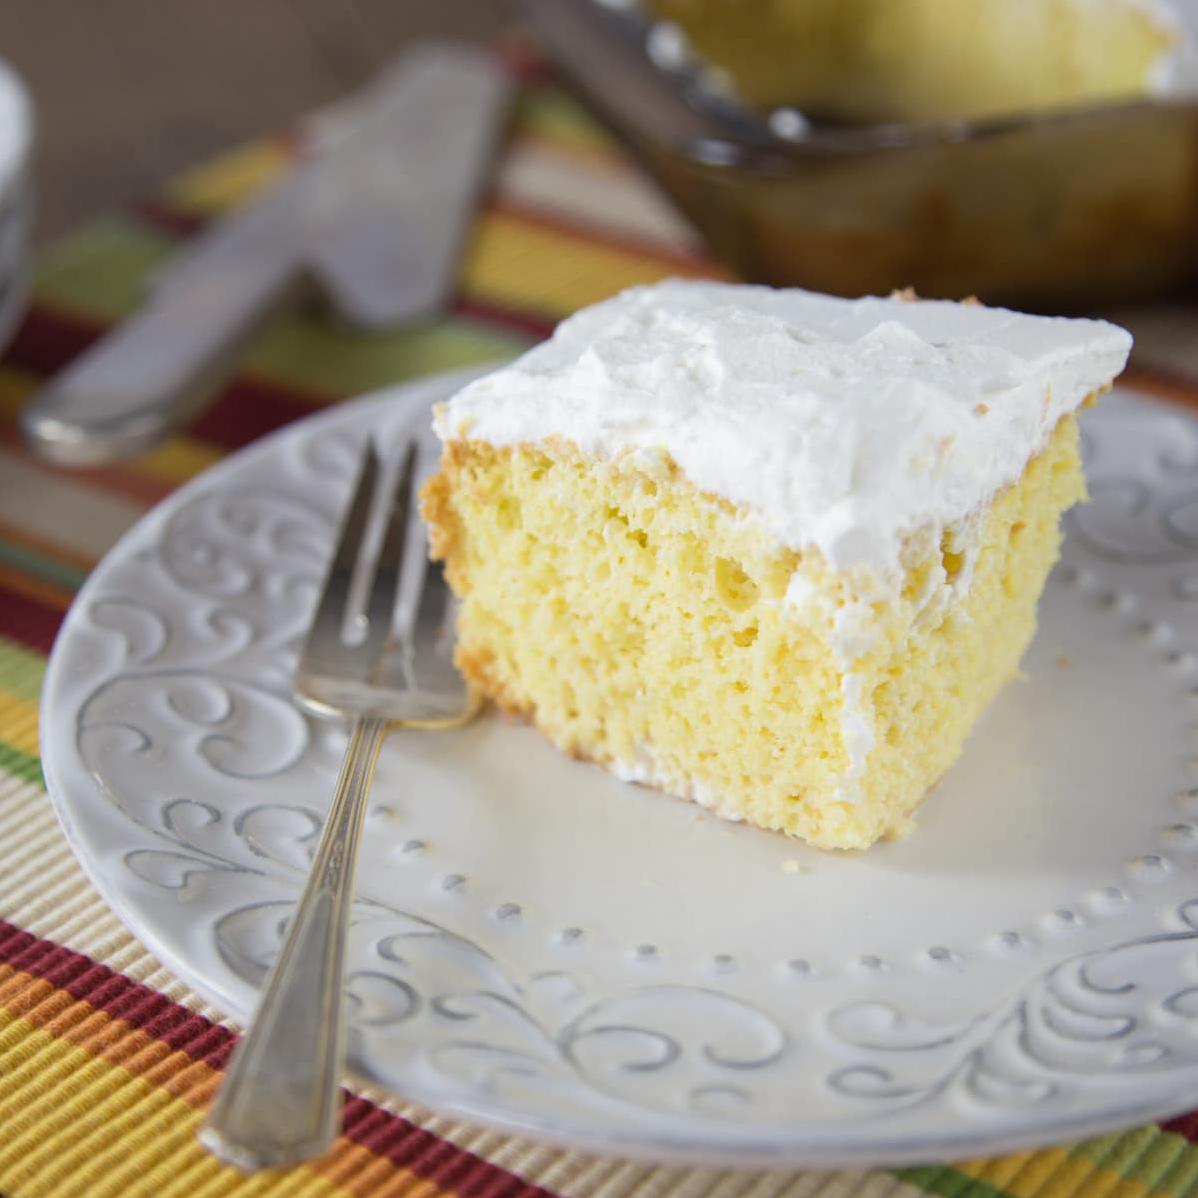  Jump into the clouds with this fluffy cake.